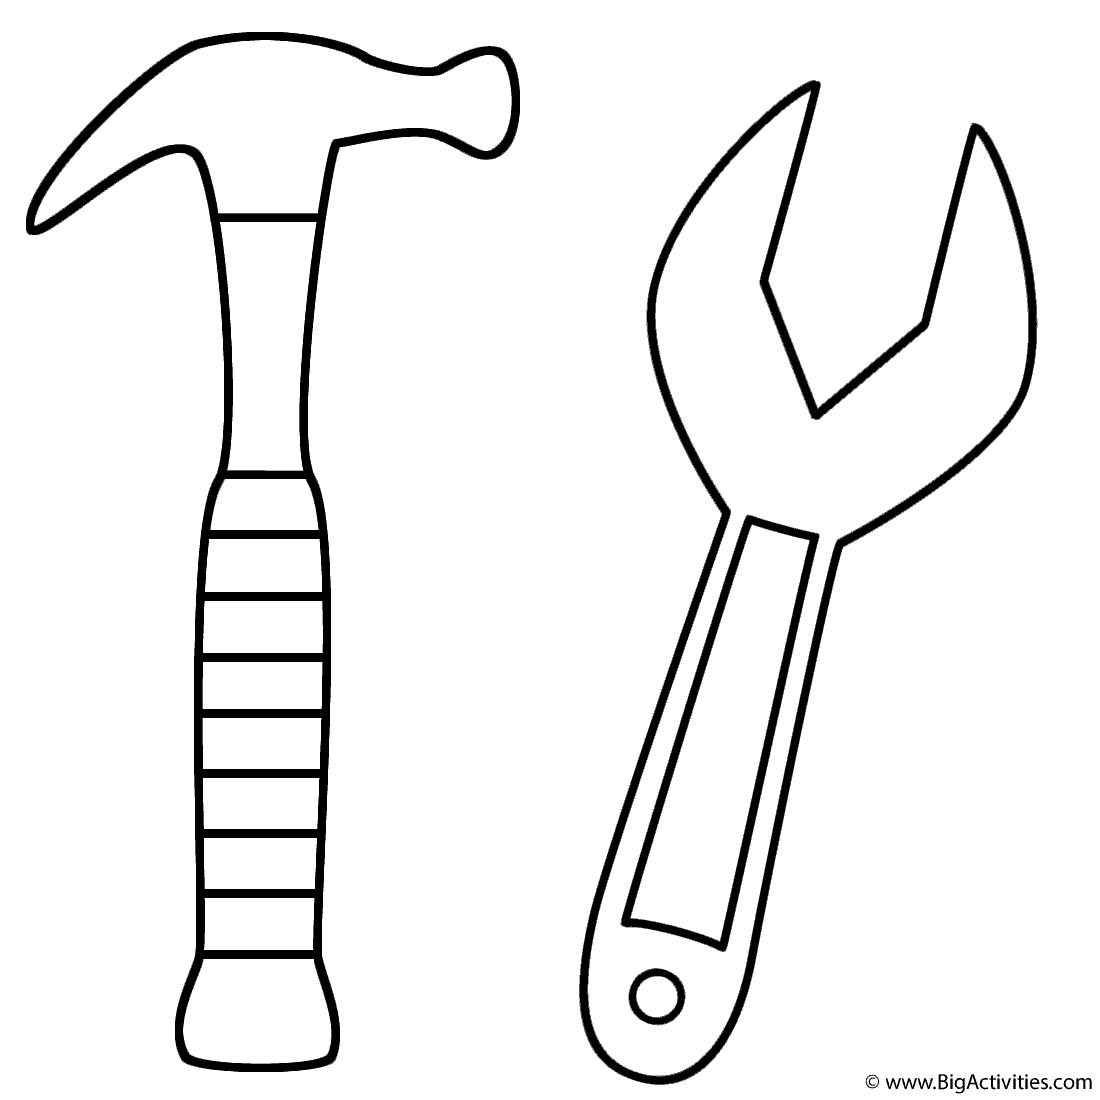 https://www.bigactivities.com/coloring/tools/hammers/images/hammer_wrench.png